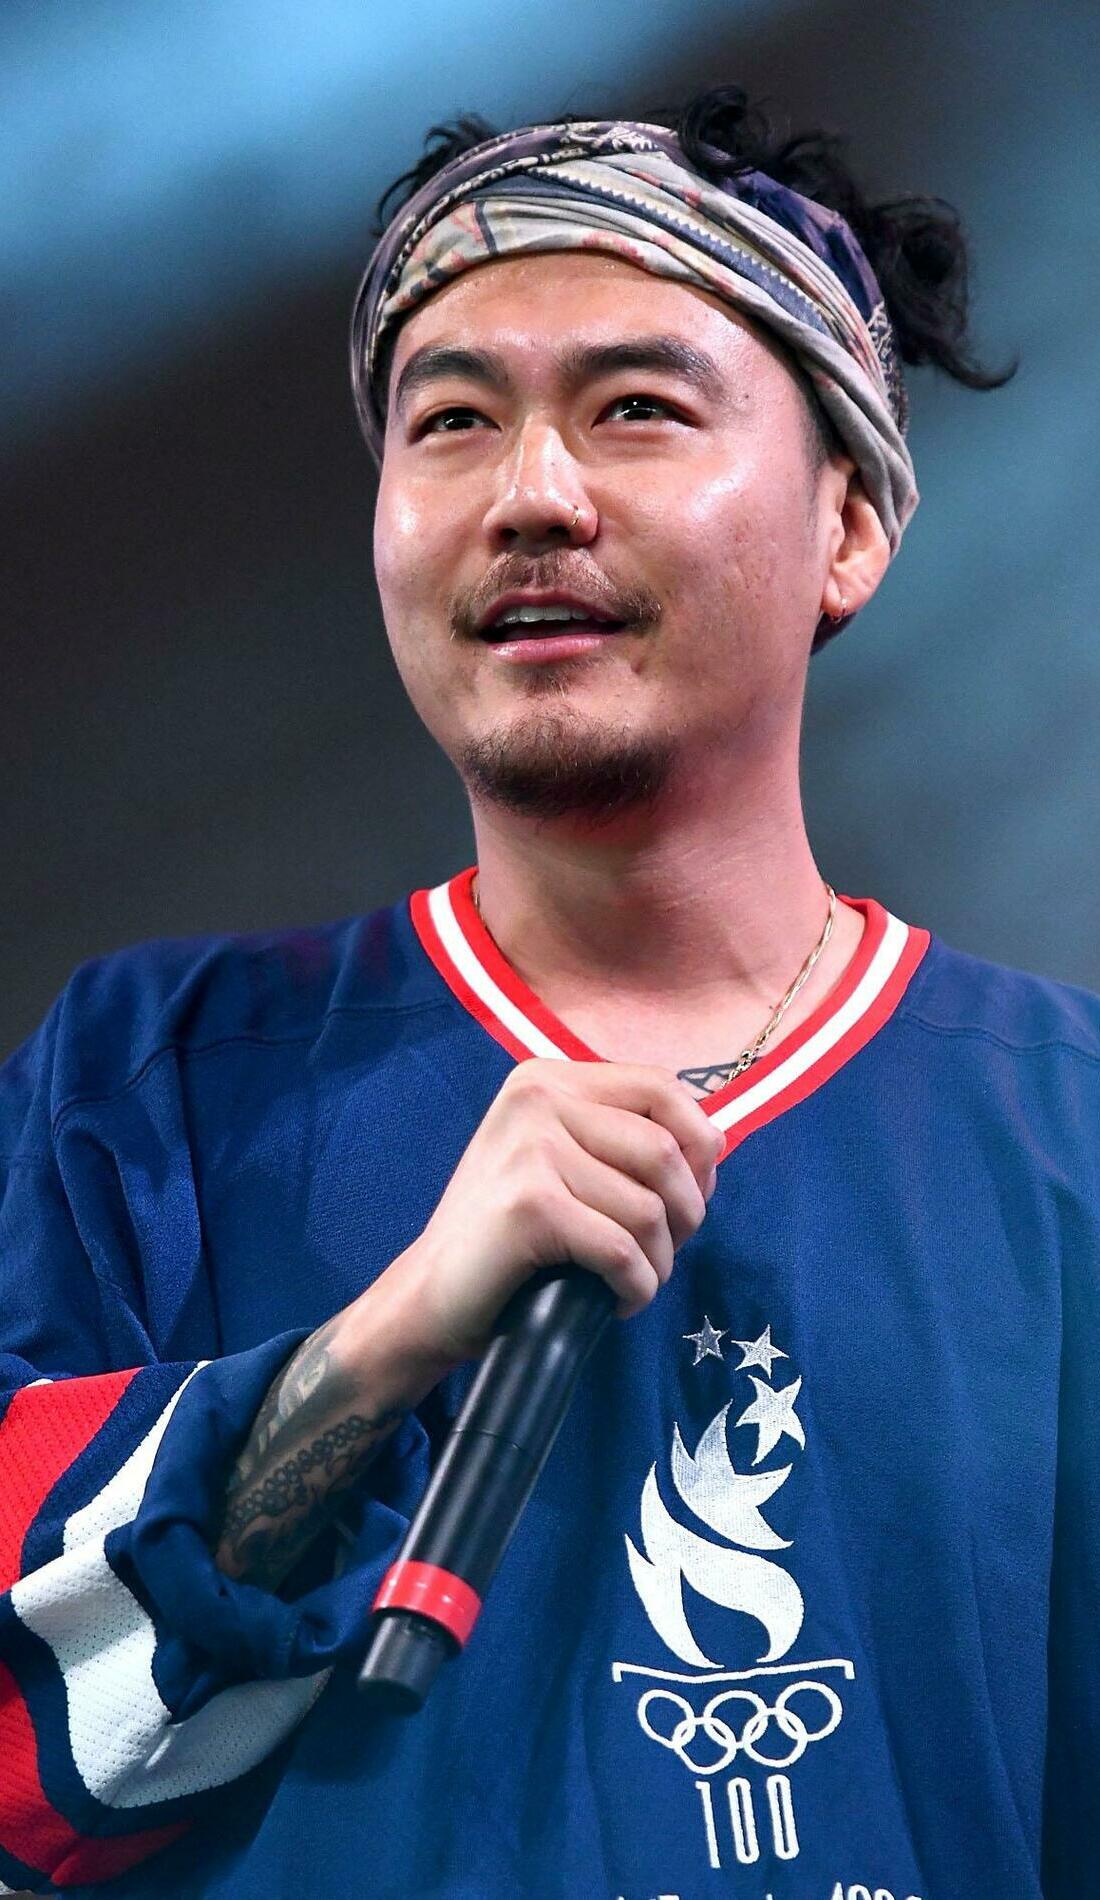 A Dumbfoundead live event